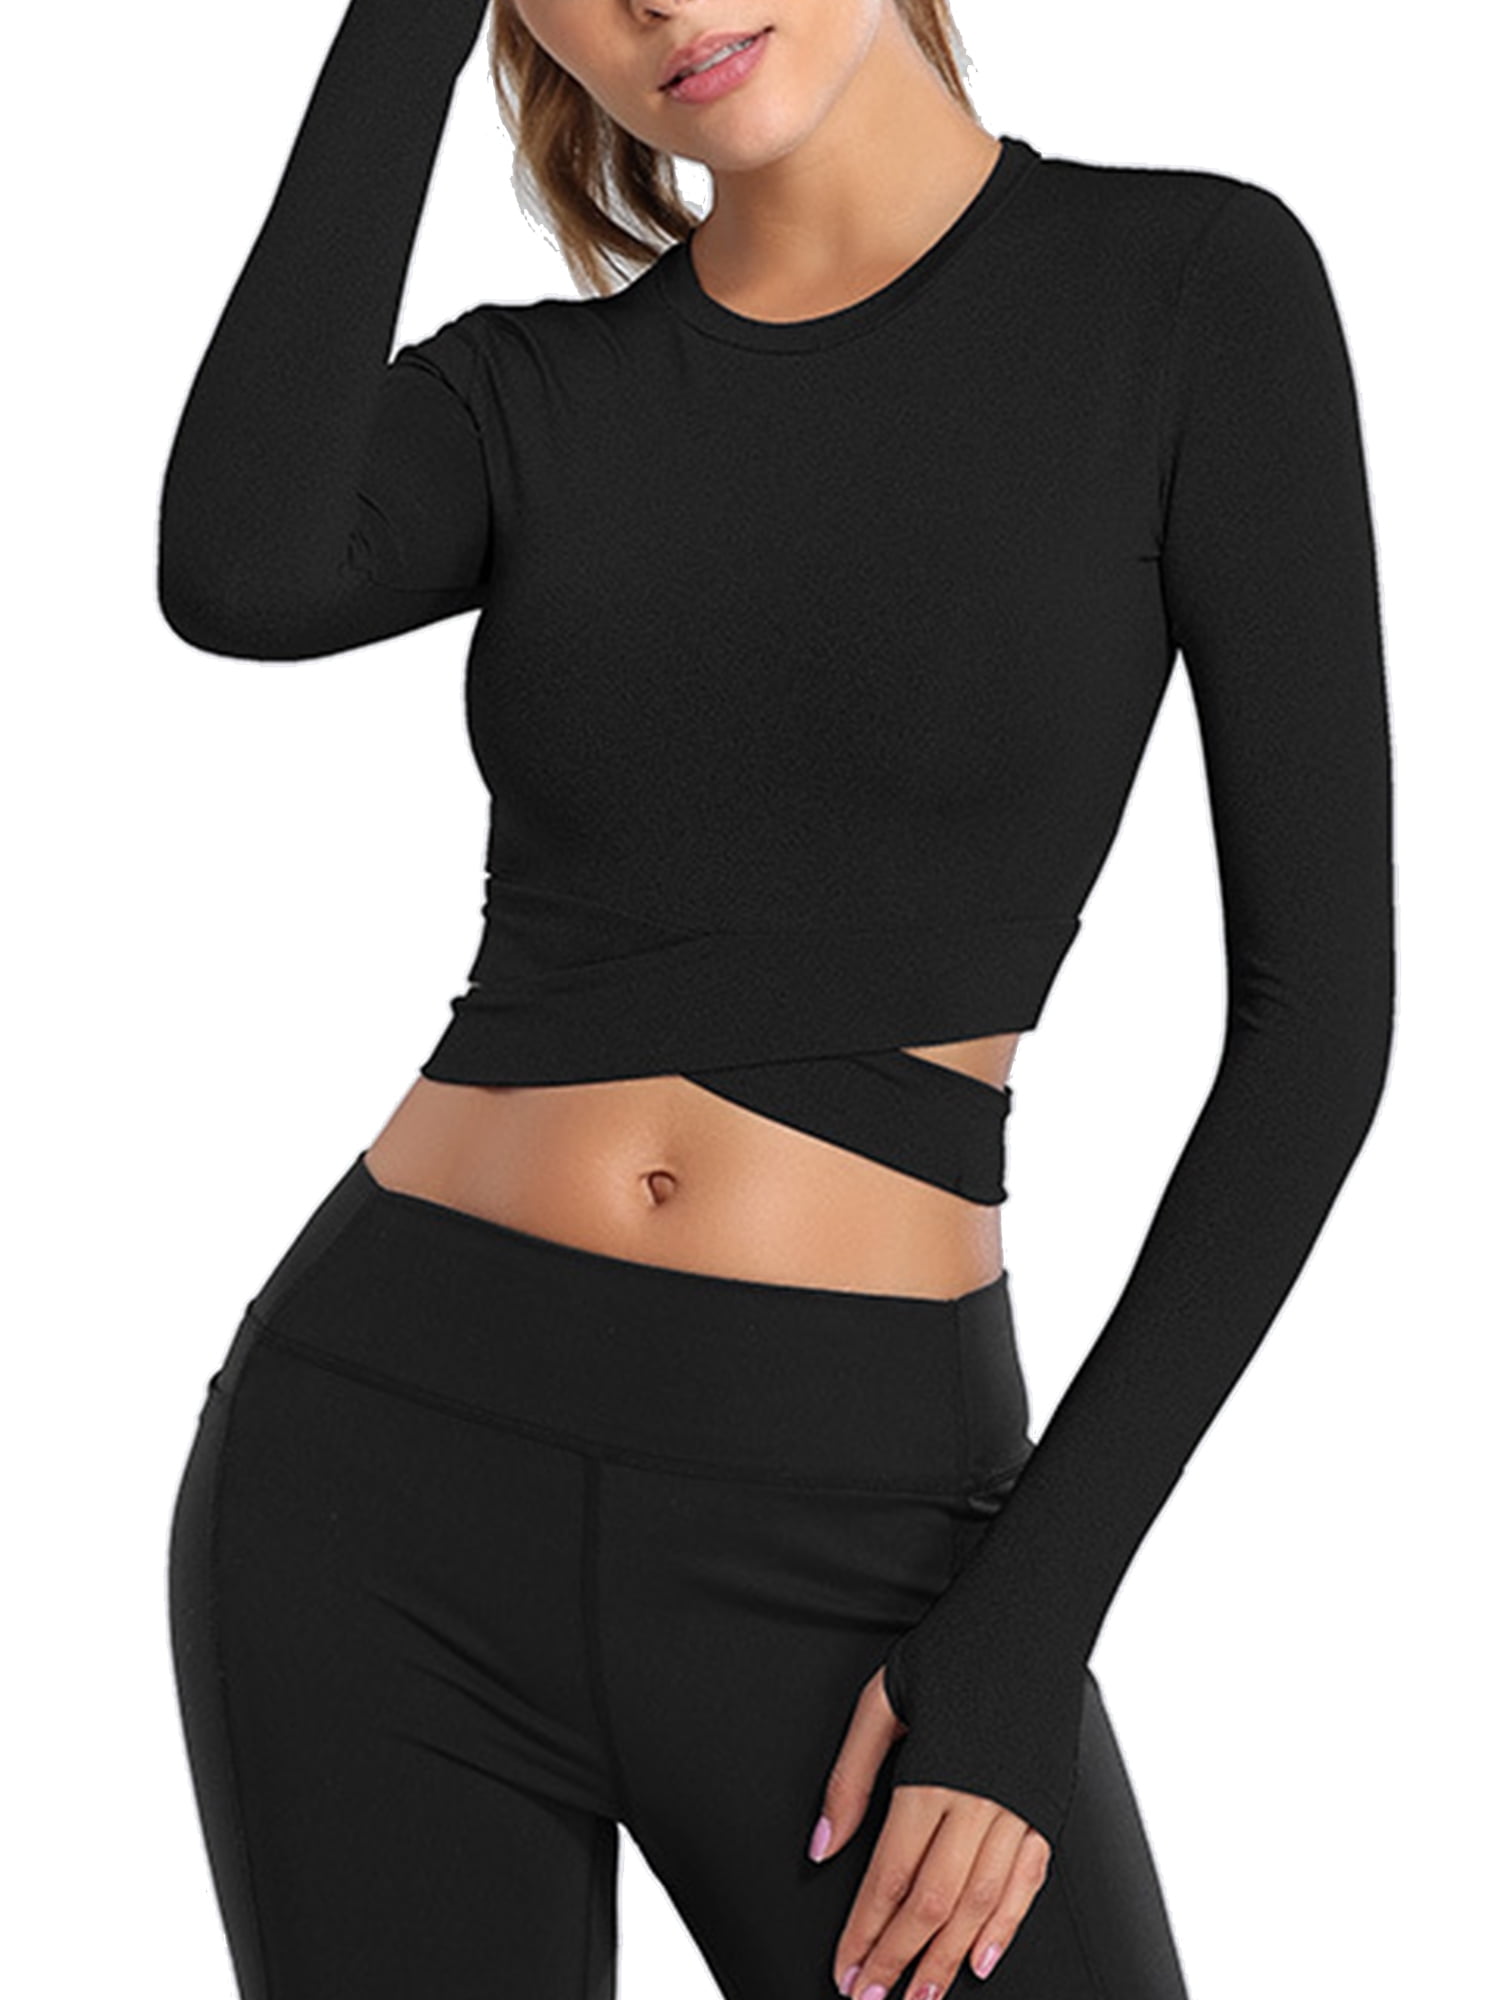 Sexy Dance Women's Crop Top Yoga Shirts Moisture-Wicking Tummy Cross Gym  Fitness Running Long Sleeve Compression Shirts Athletic Activewear for Women  Girls 